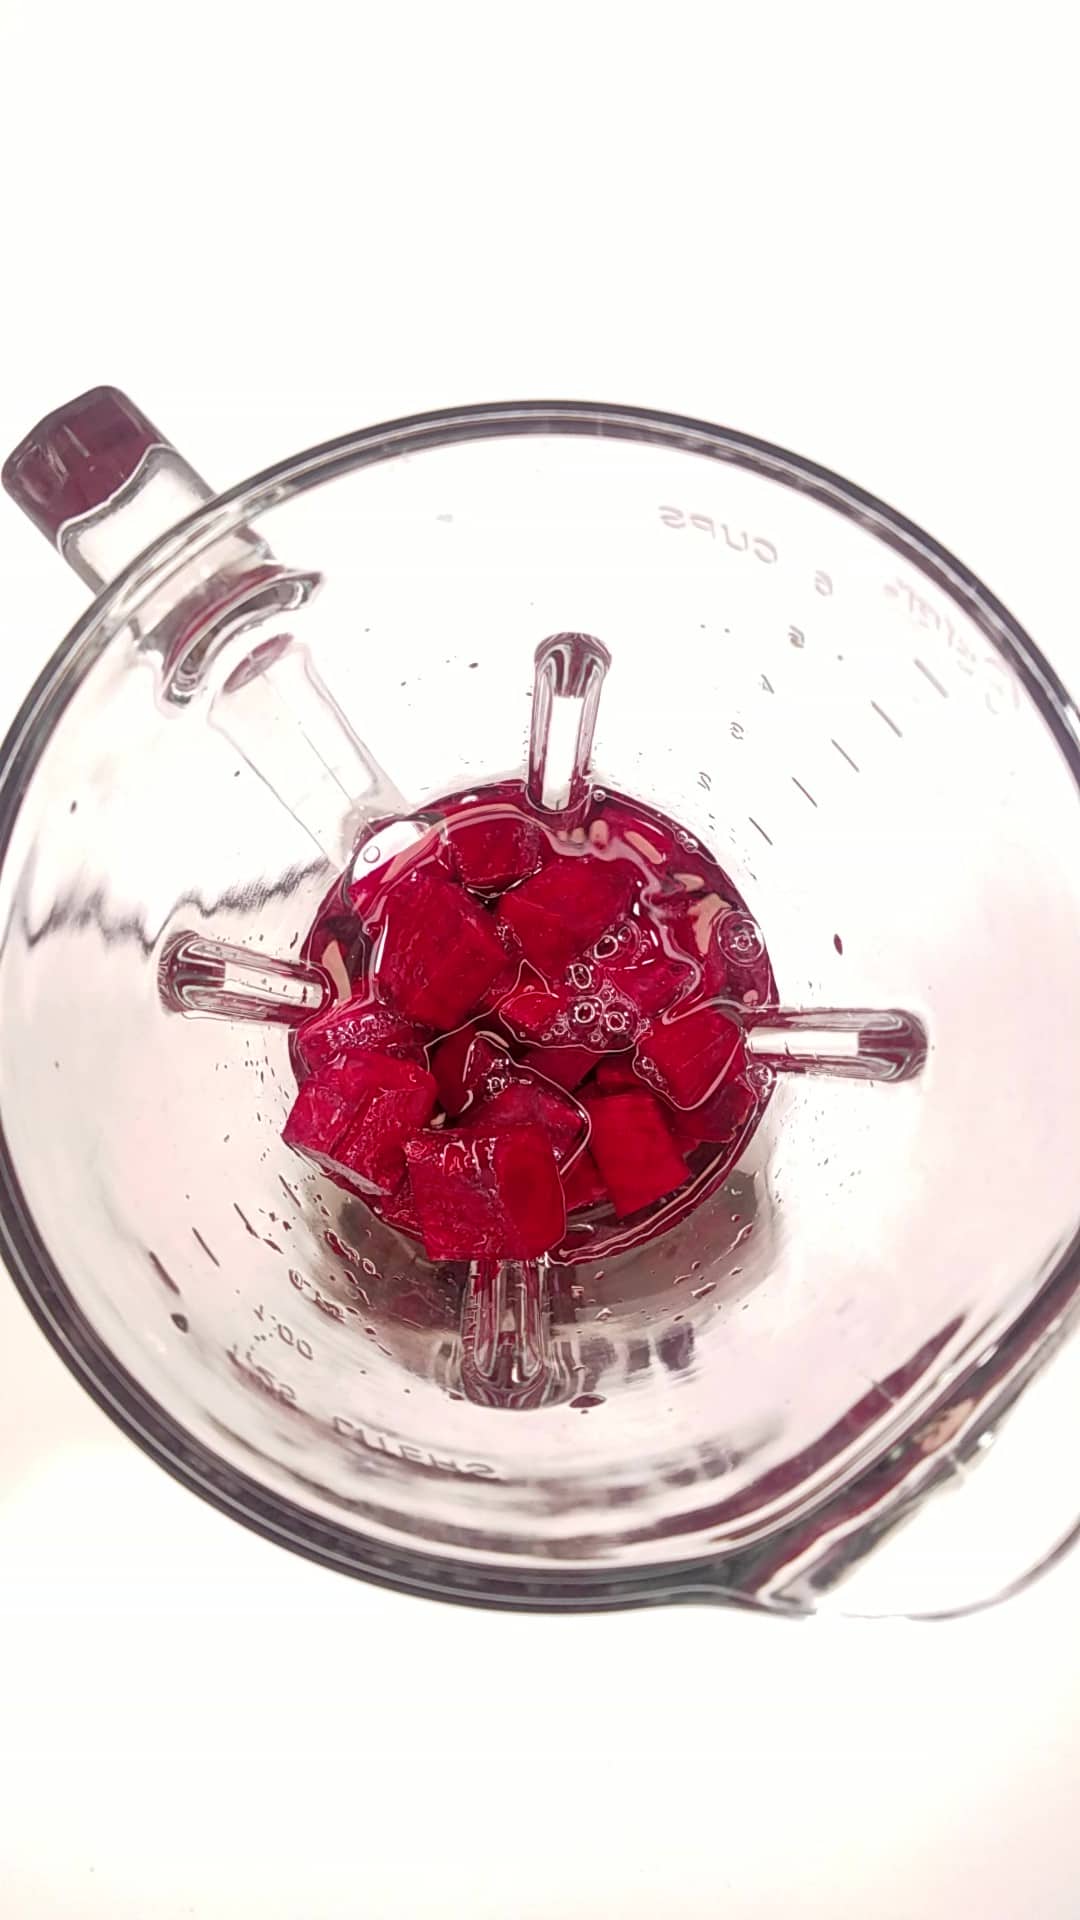 Blending chopped beets and water in a blender.